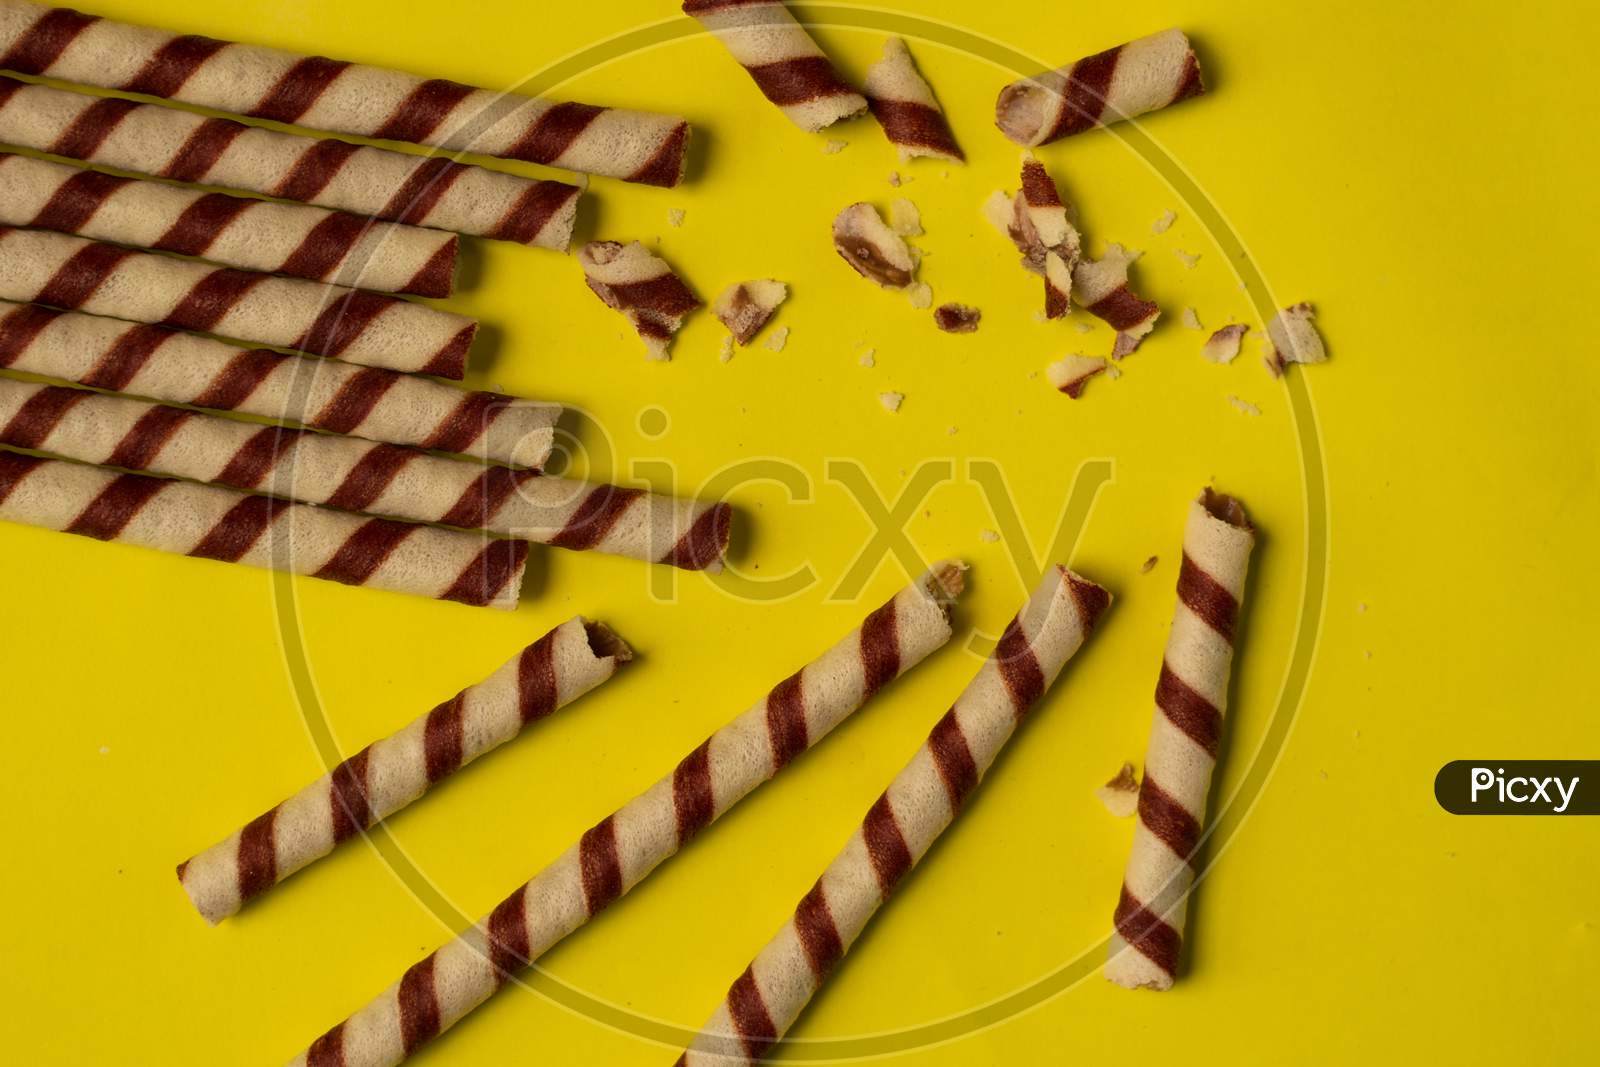 Chocolate Wafer Roll On A Plain Yellow Background